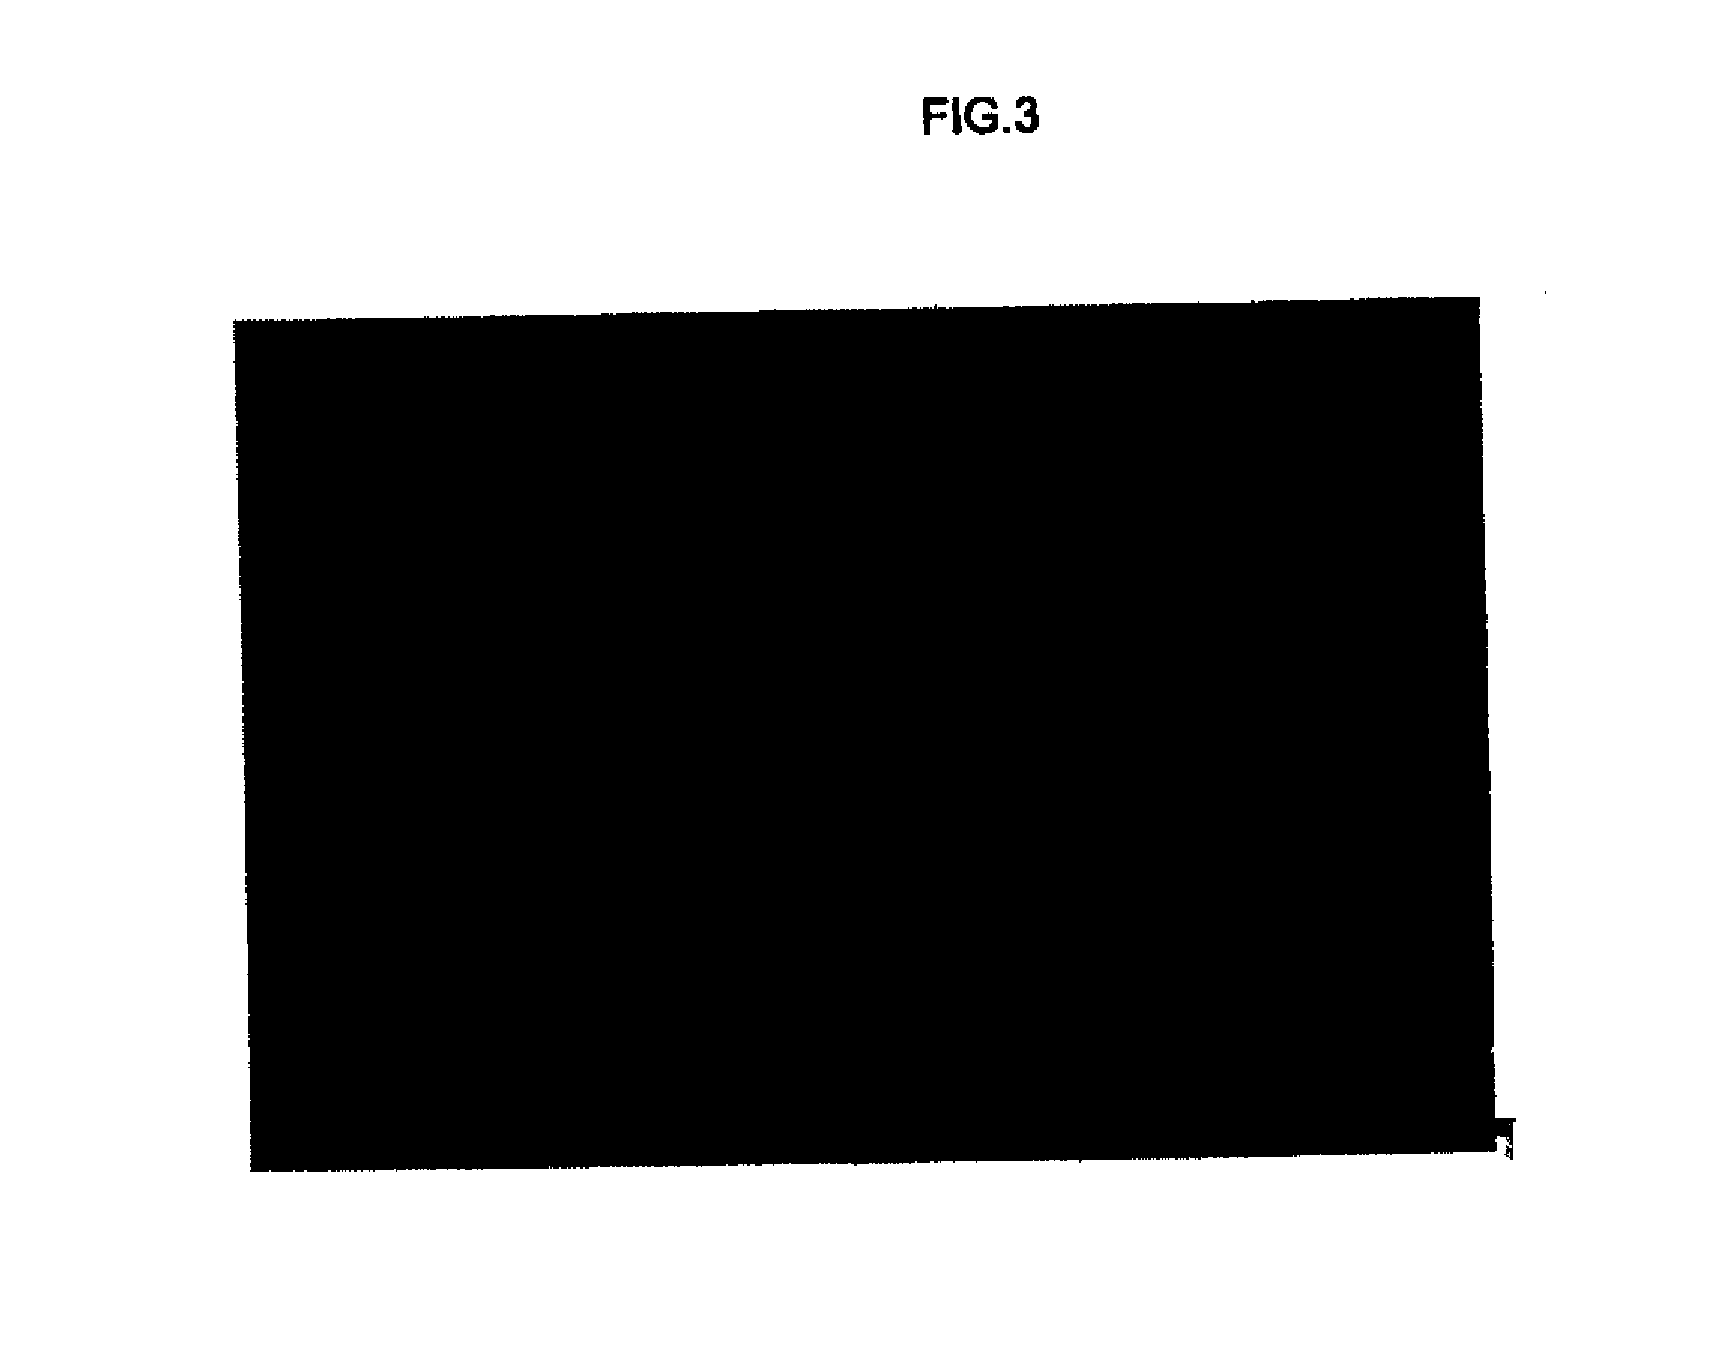 Photocurable composition, article, and method of use